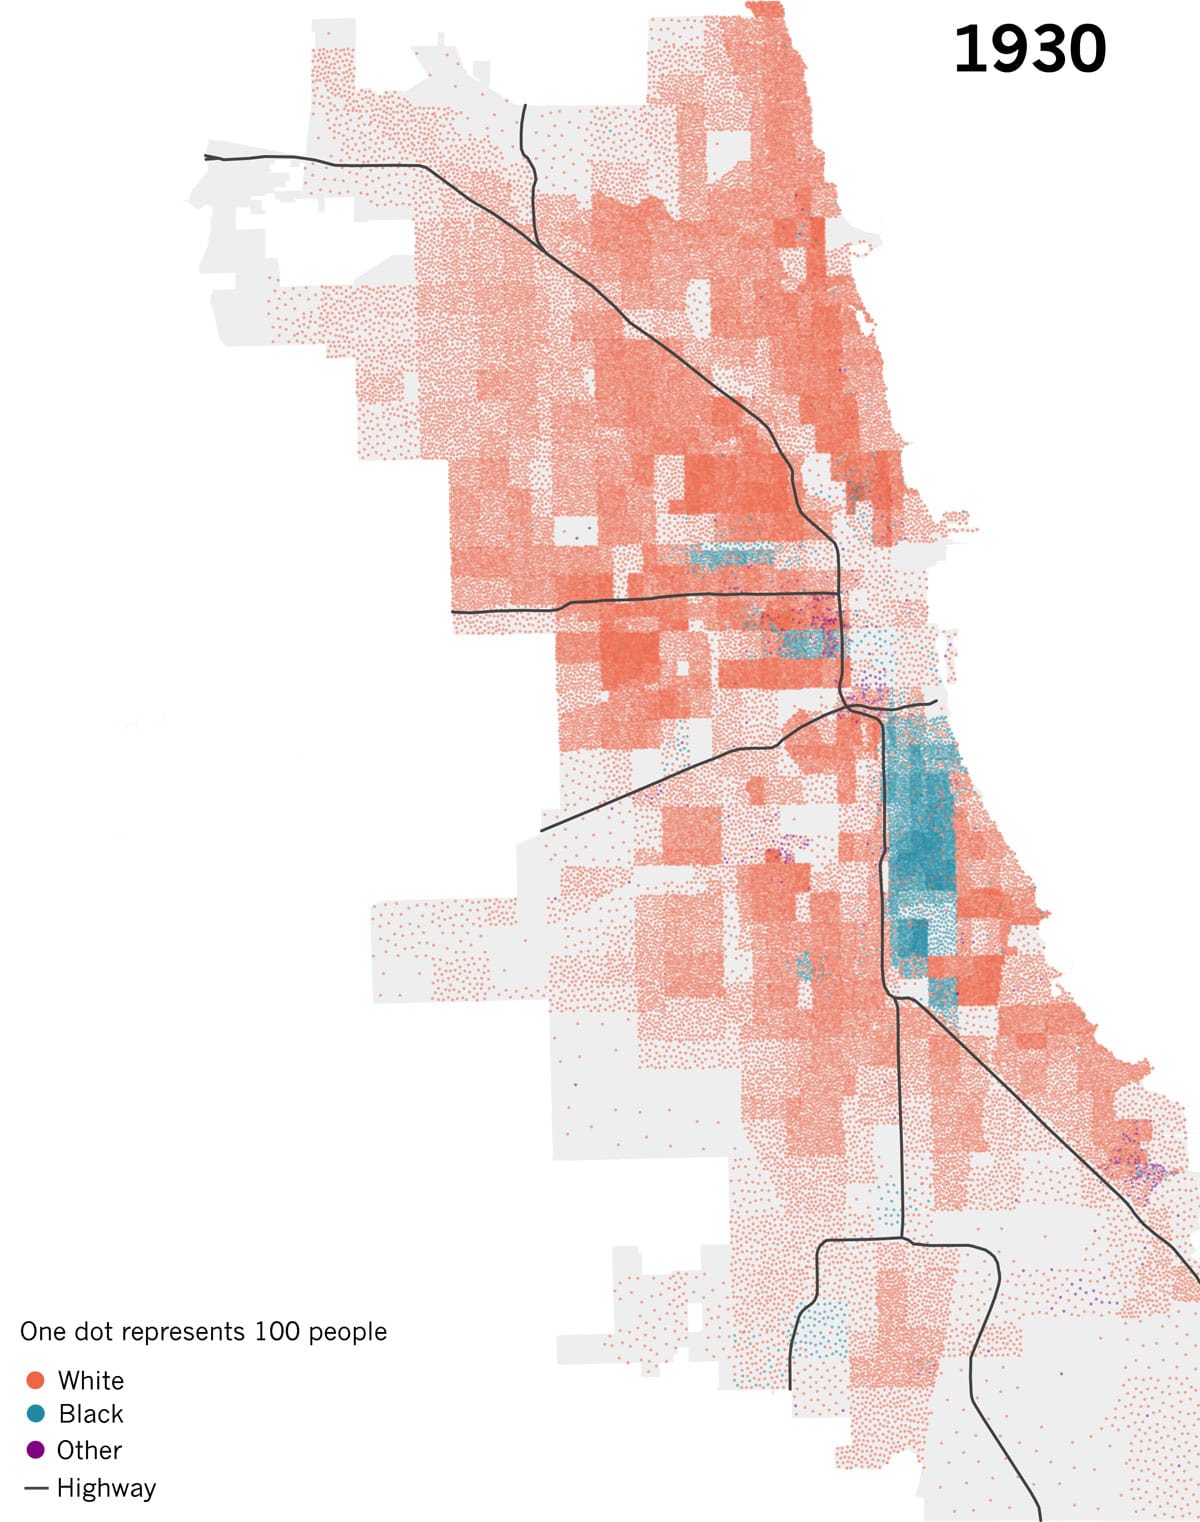 Map of racial population in Chicago in 1930